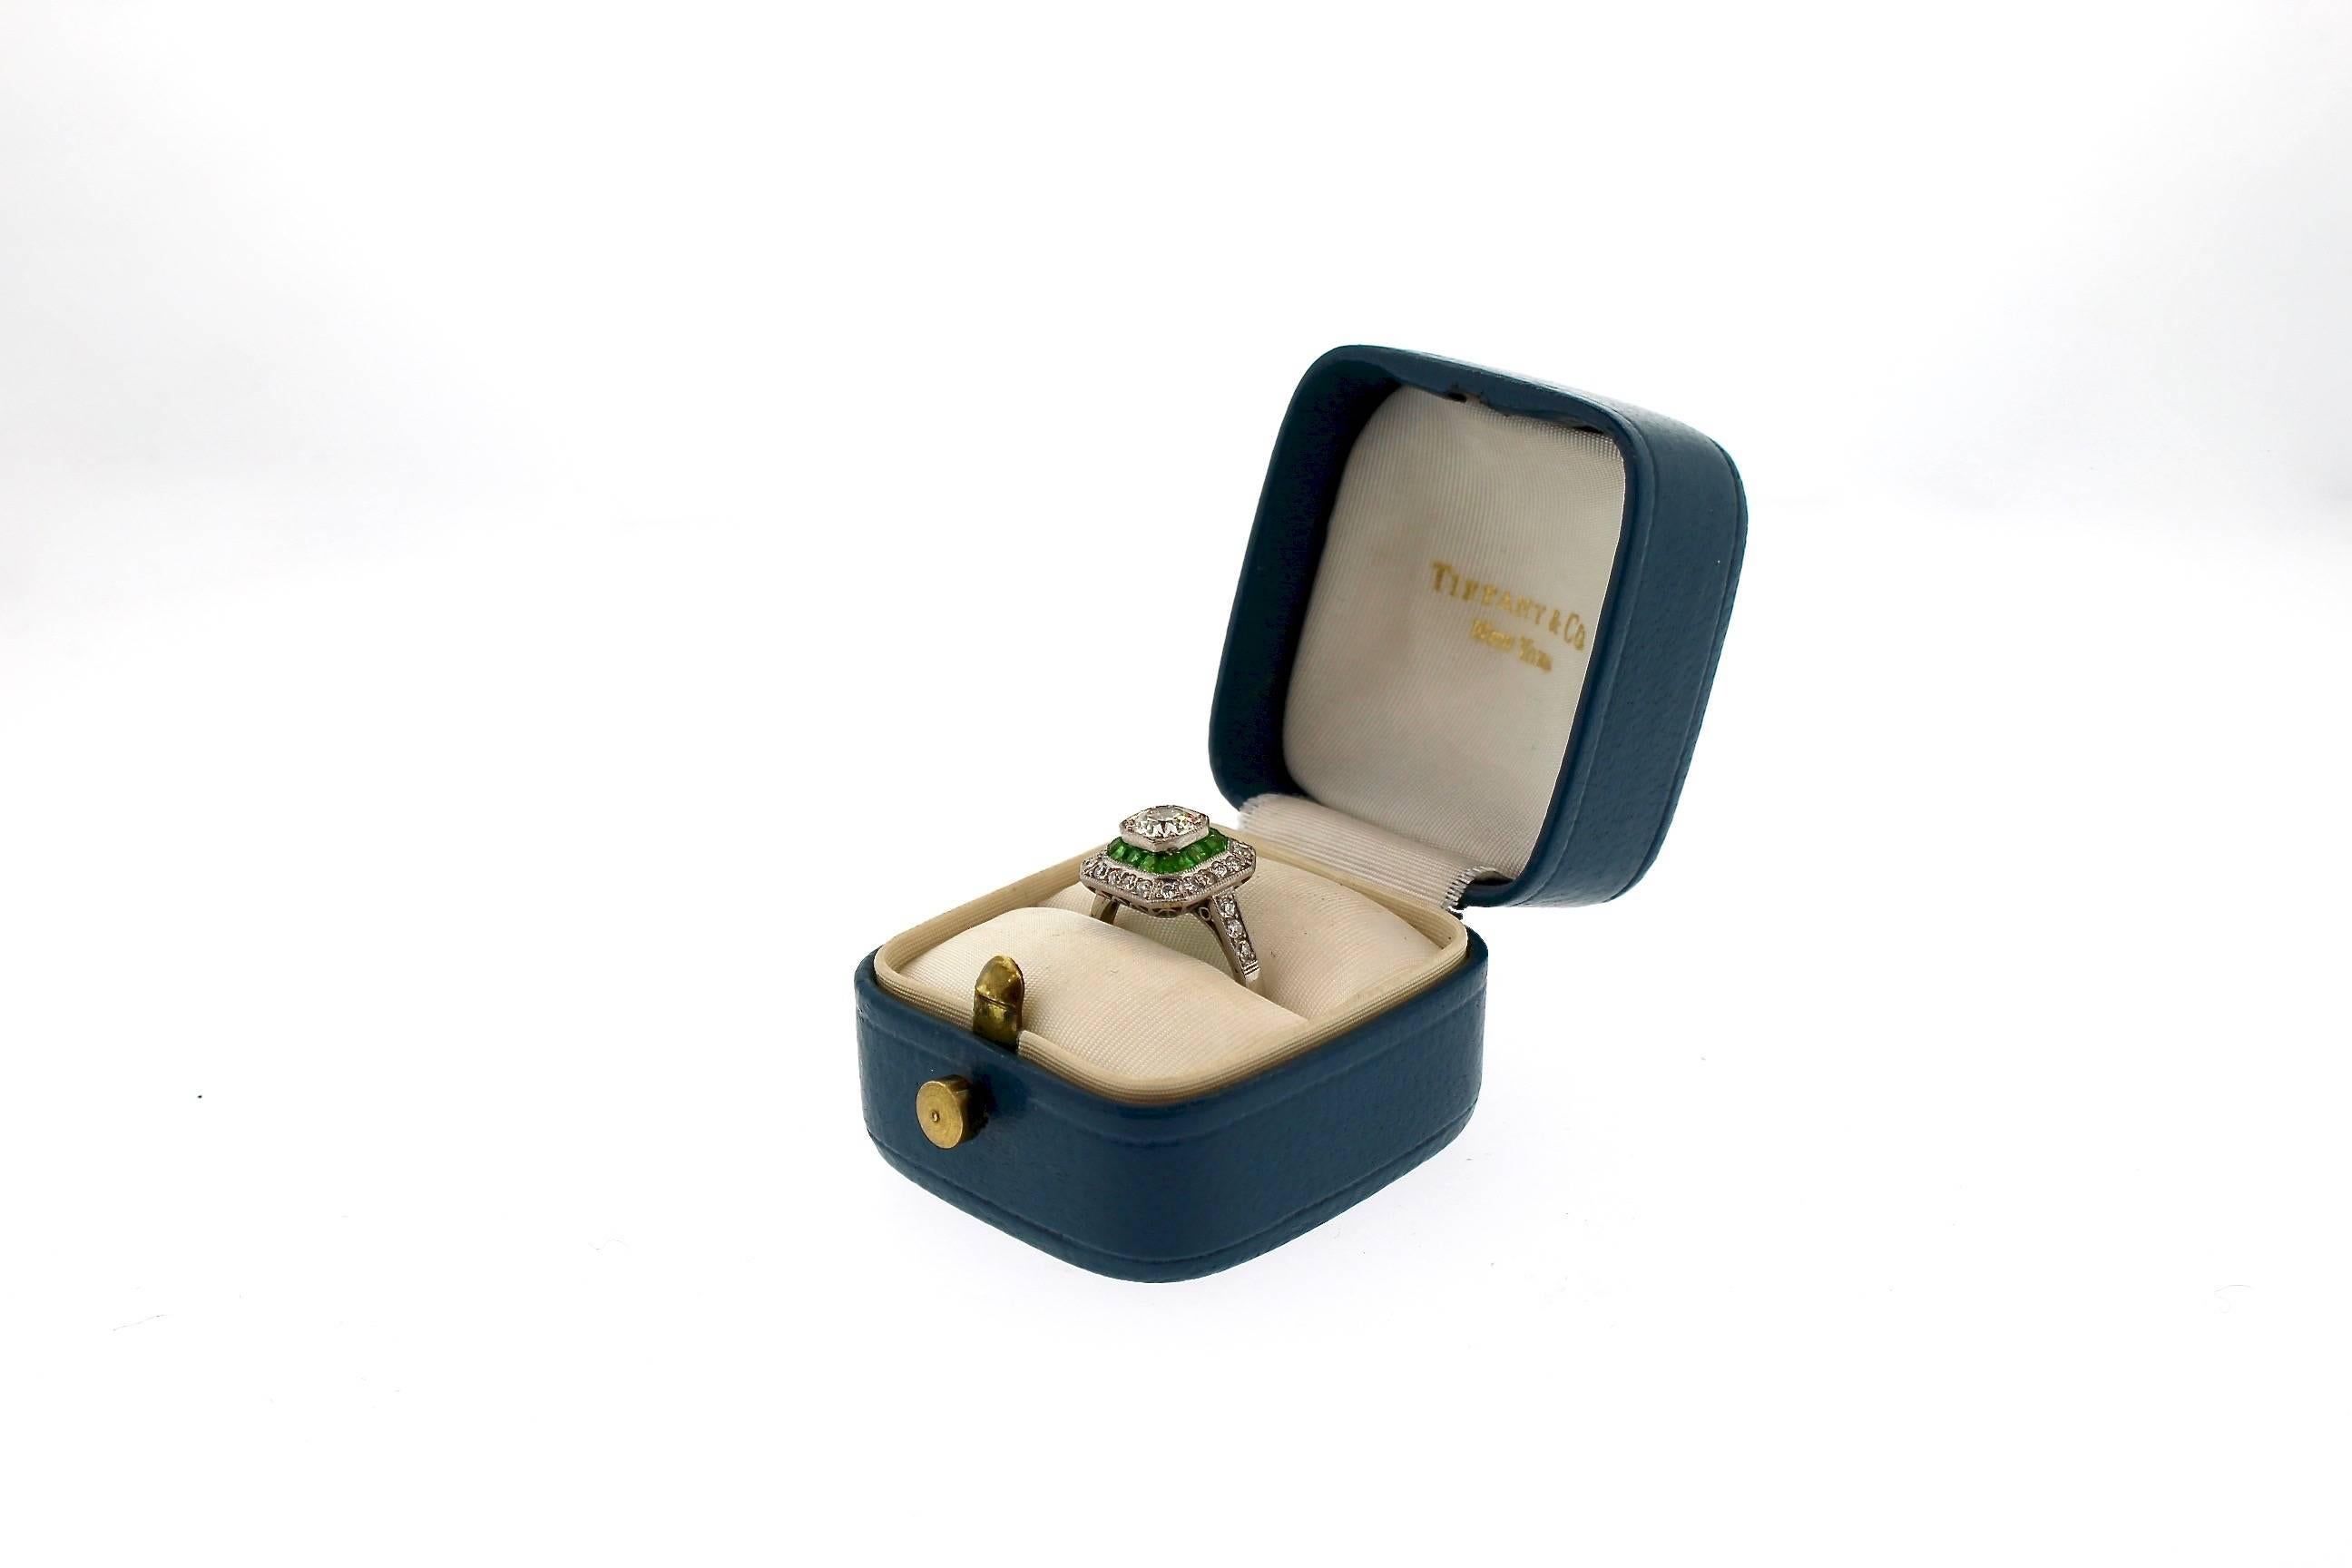 A special package for anyone!  An original Art Deco diamond platinum ring in its original box.  This ring centers on an Old European cut diamond weighing approximately 0.80 cts.  It is surrounded with calibre cut green Demantoid Garnets which weigh